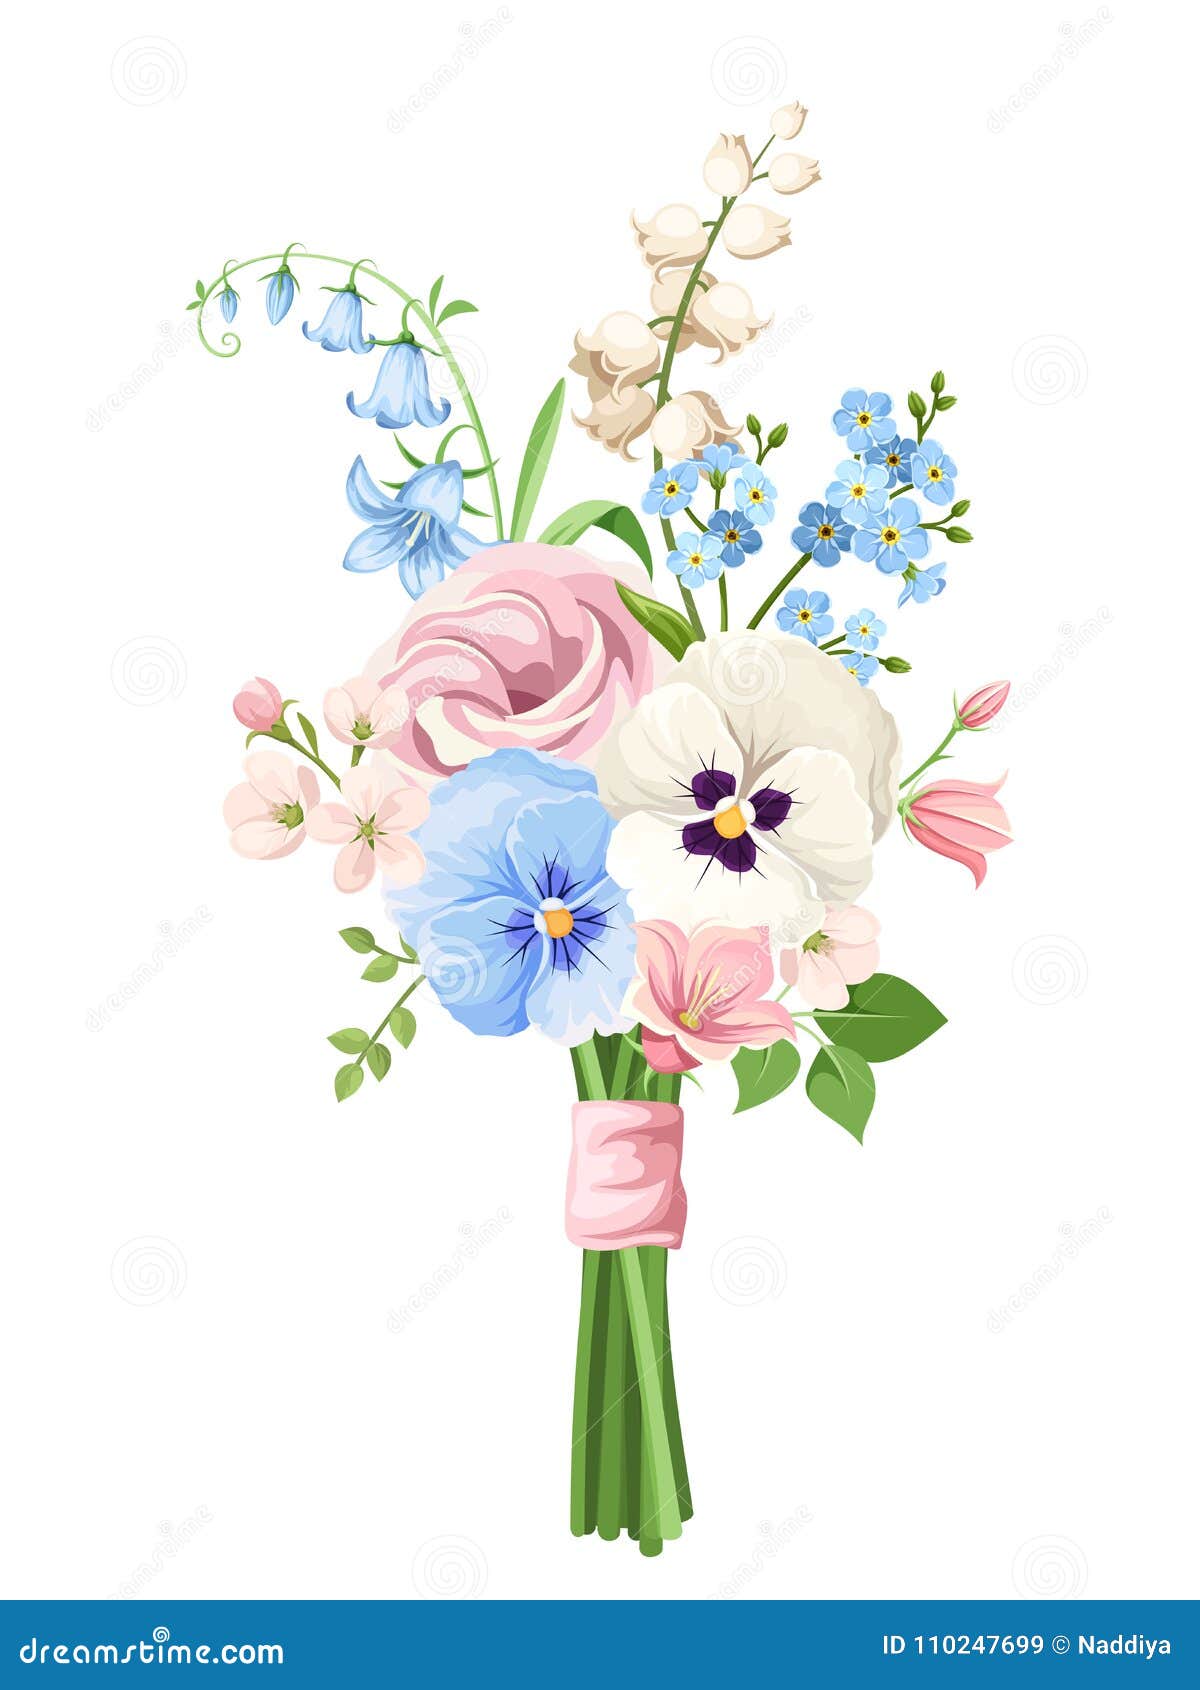 bouquet of pink, blue and white flowers.  .